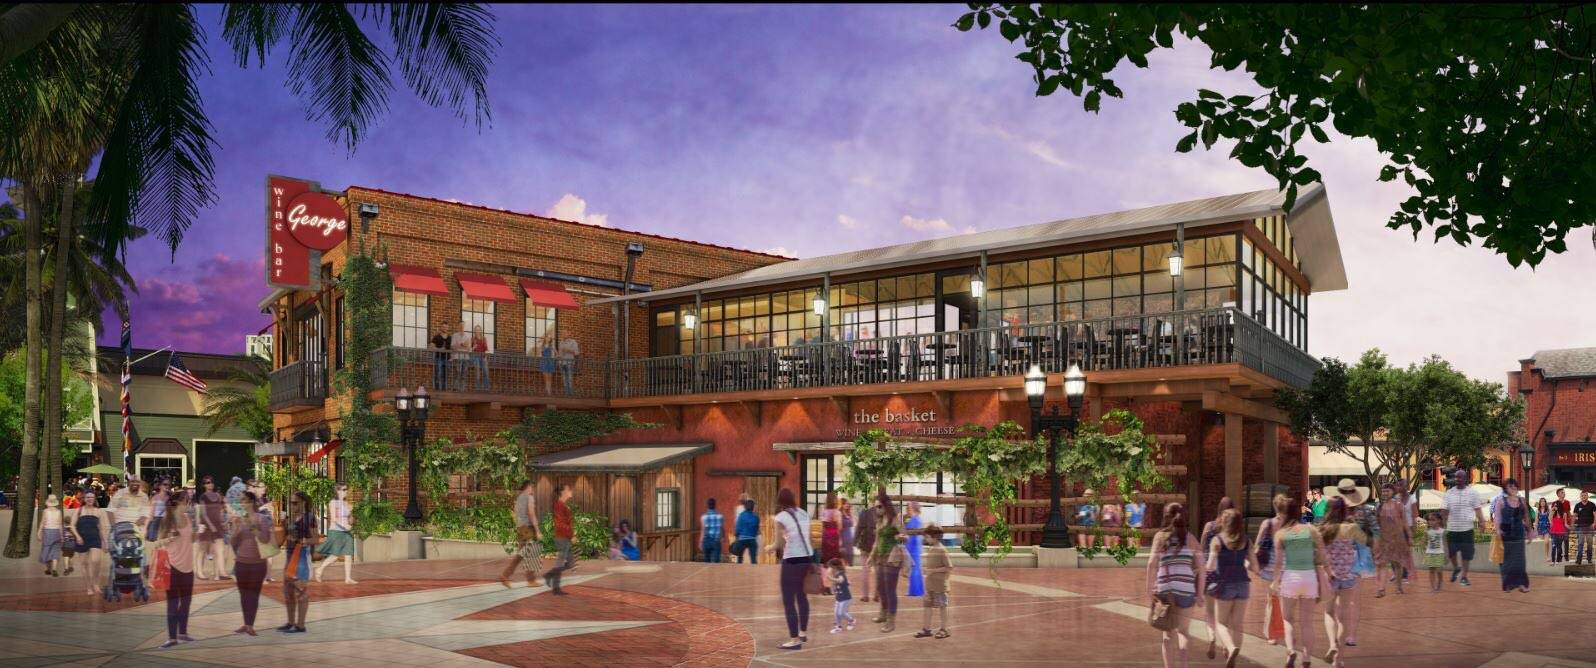 PHOTO - New concept art shows inside of Wine Bar George at Disney Springs